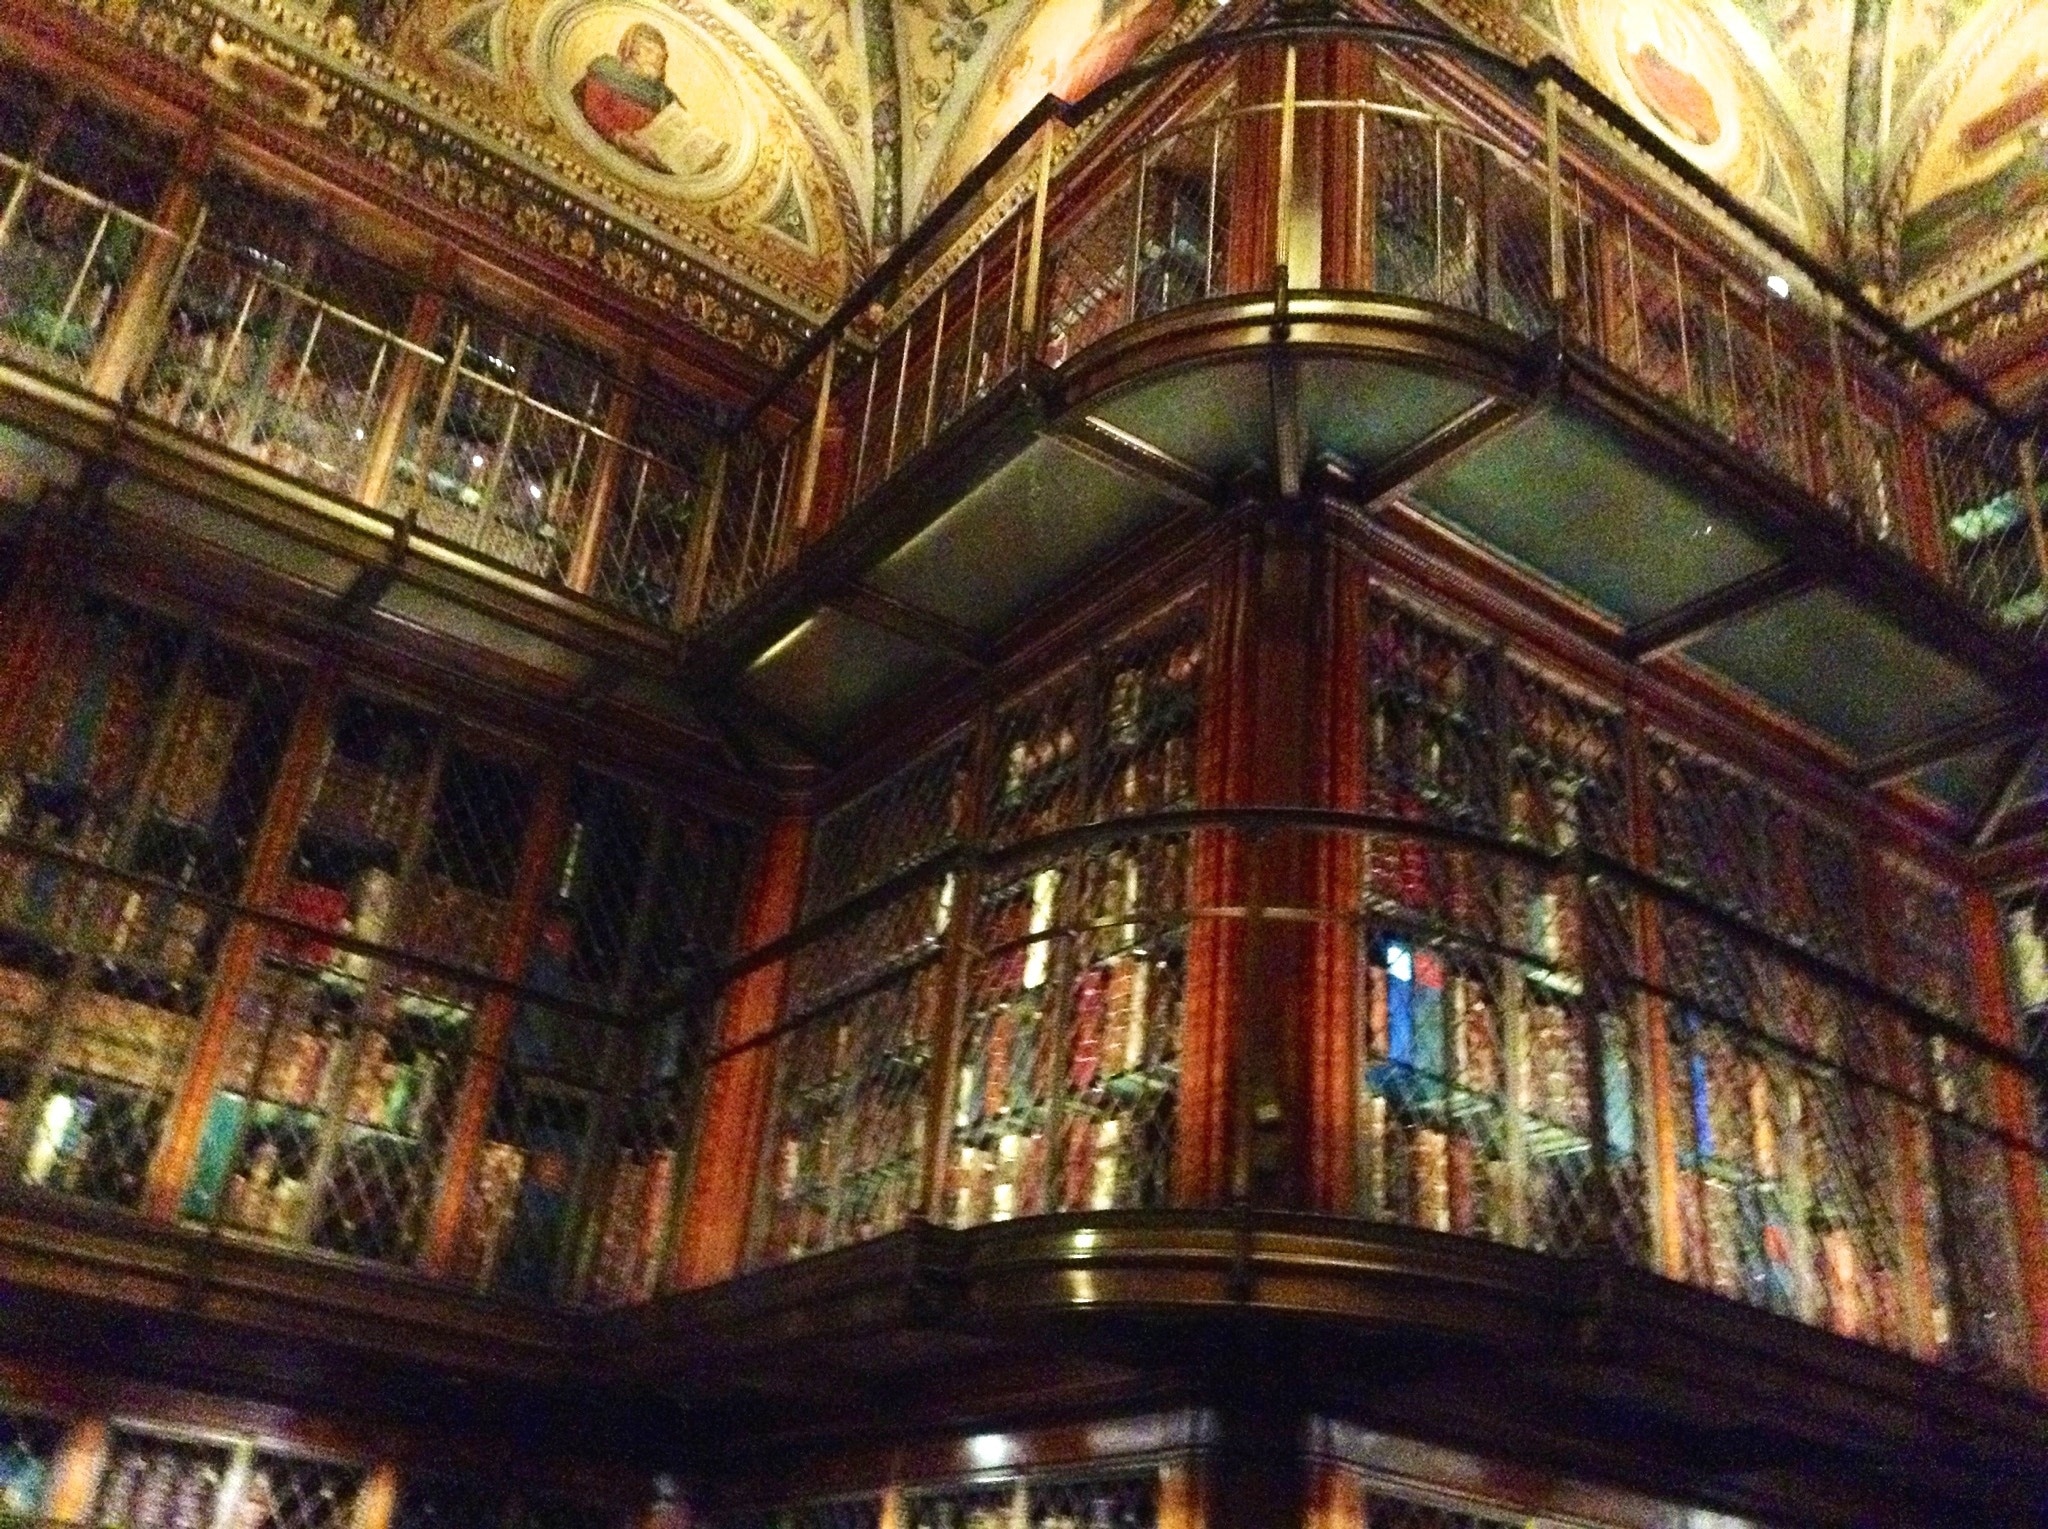 The original 1906 private library of financier Pierpont Morgan is breathtaking and his enormous collection of rare books, manuscripts, drawings and other uncommon pieces rivals any national collections.

#Museums #NewYork #NYC